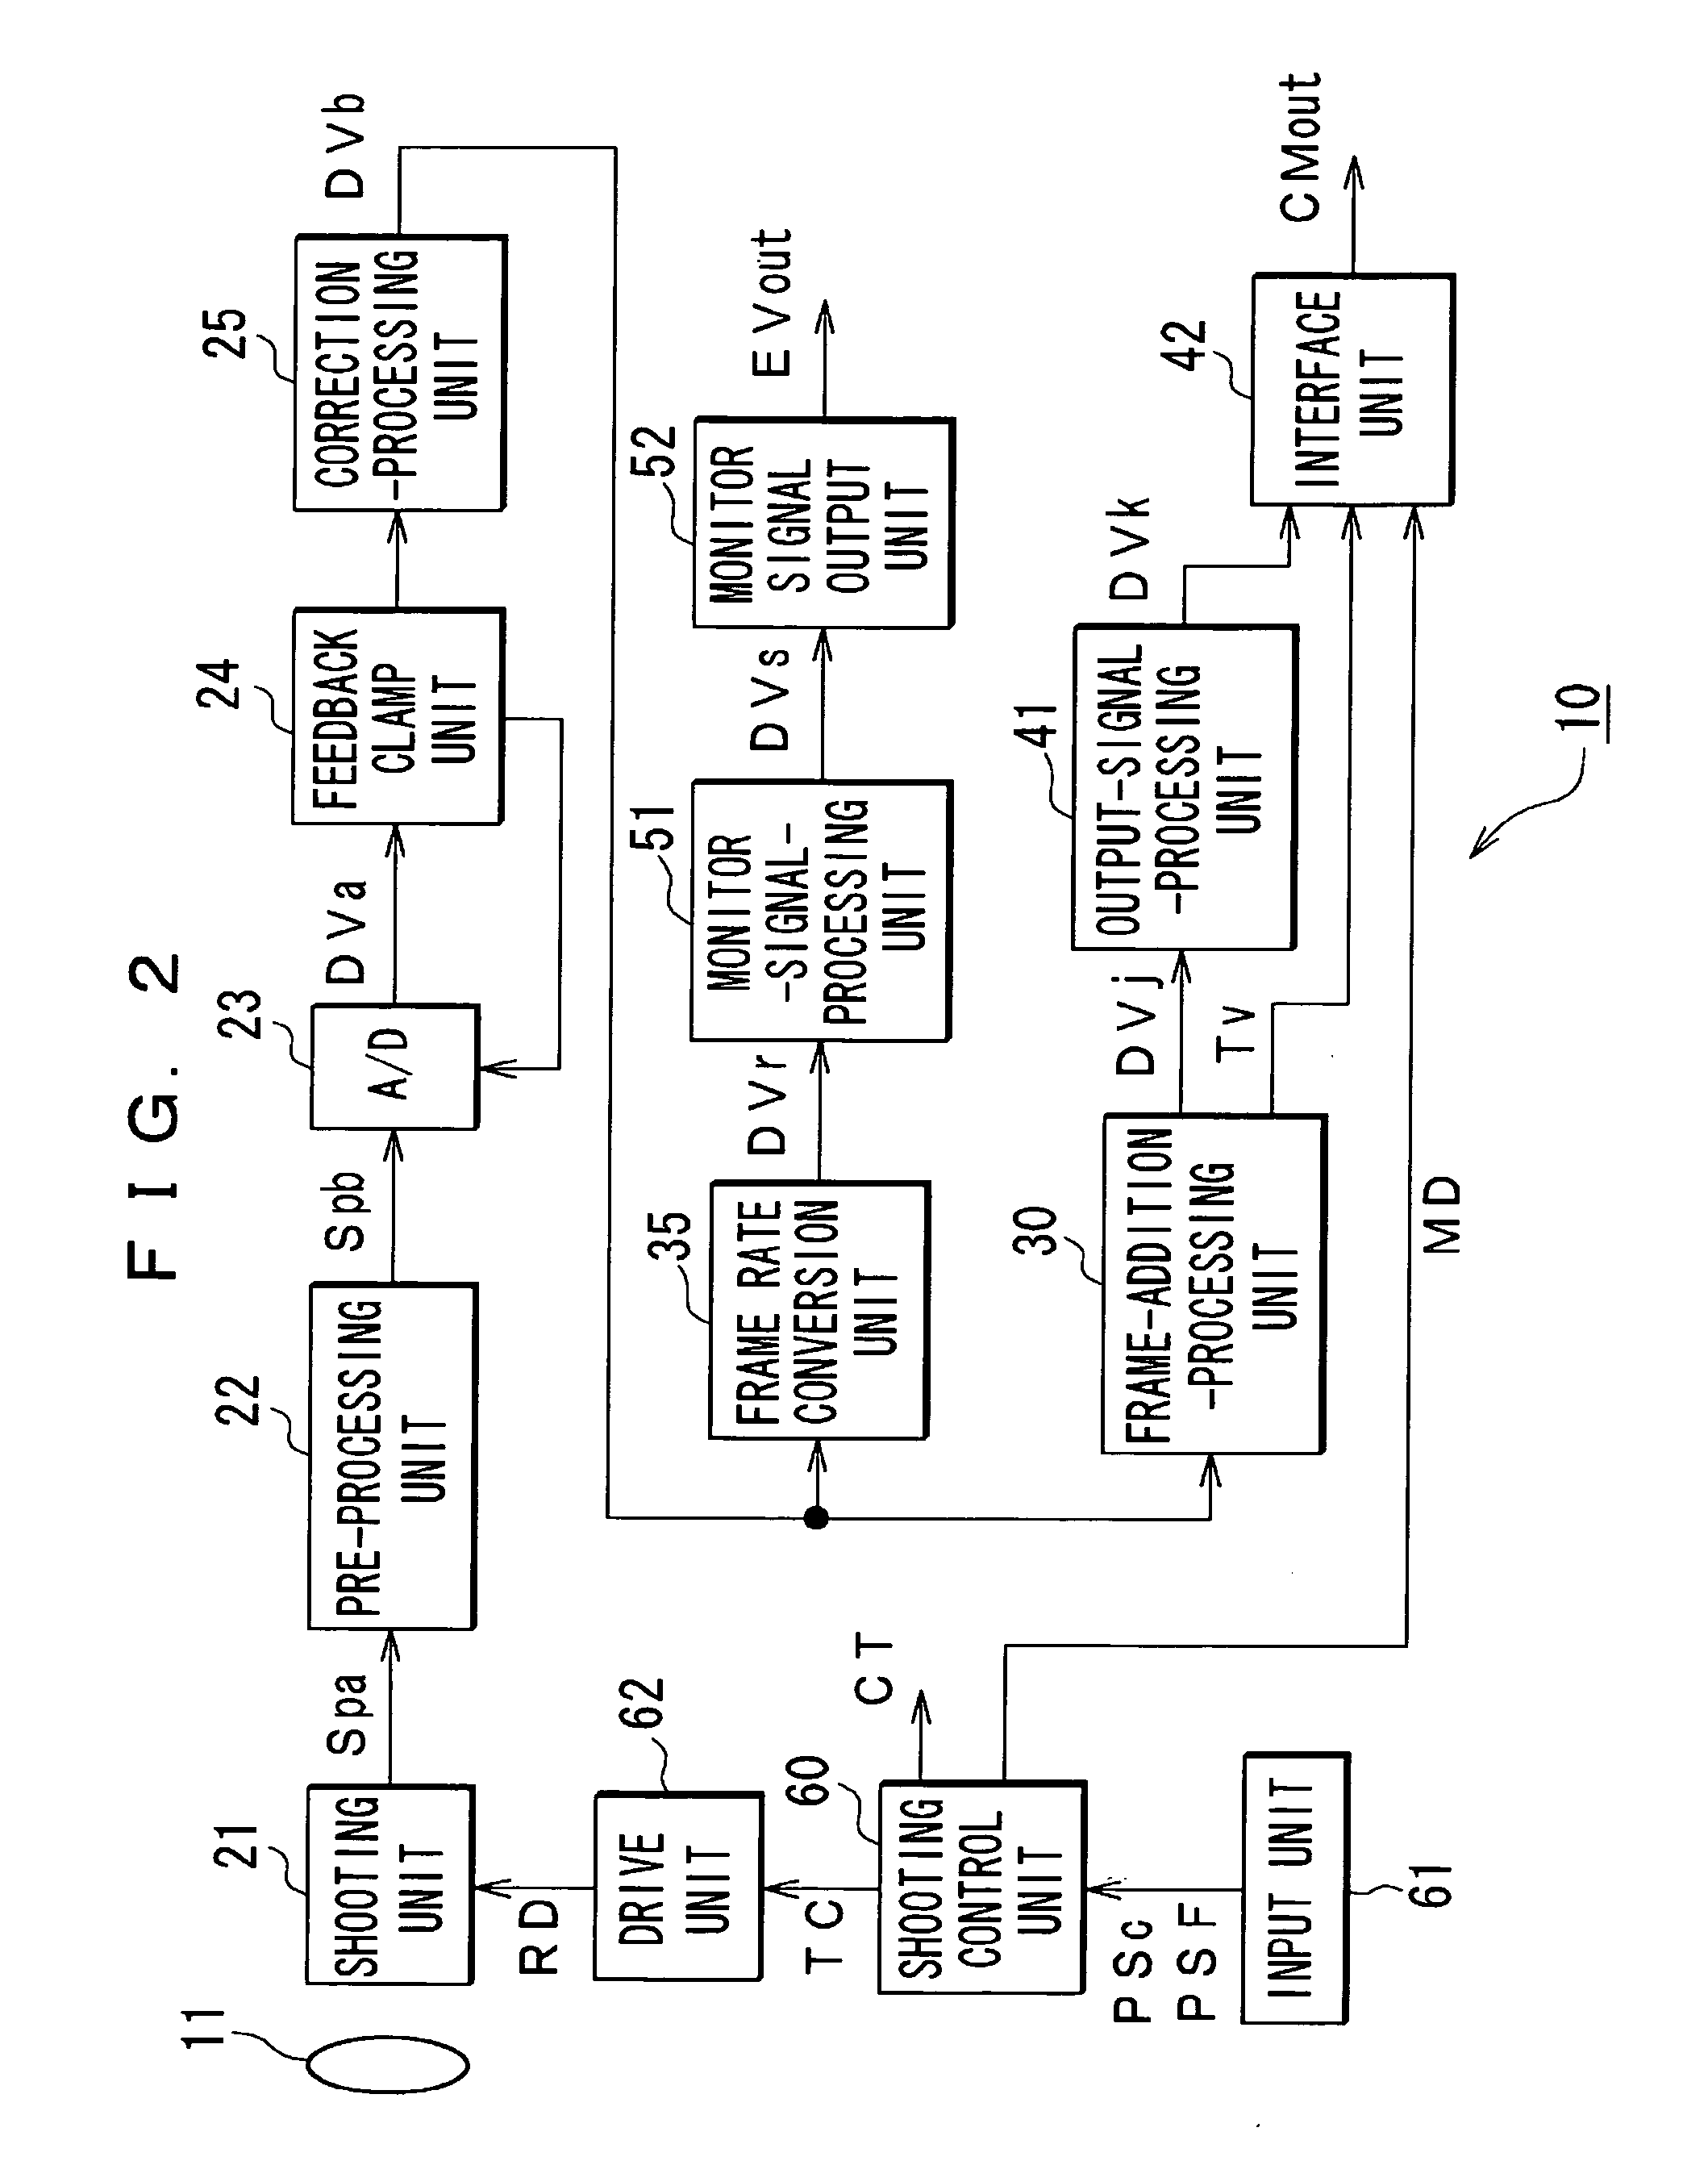 Picked up image recording system, signal recording device, and signal recording method